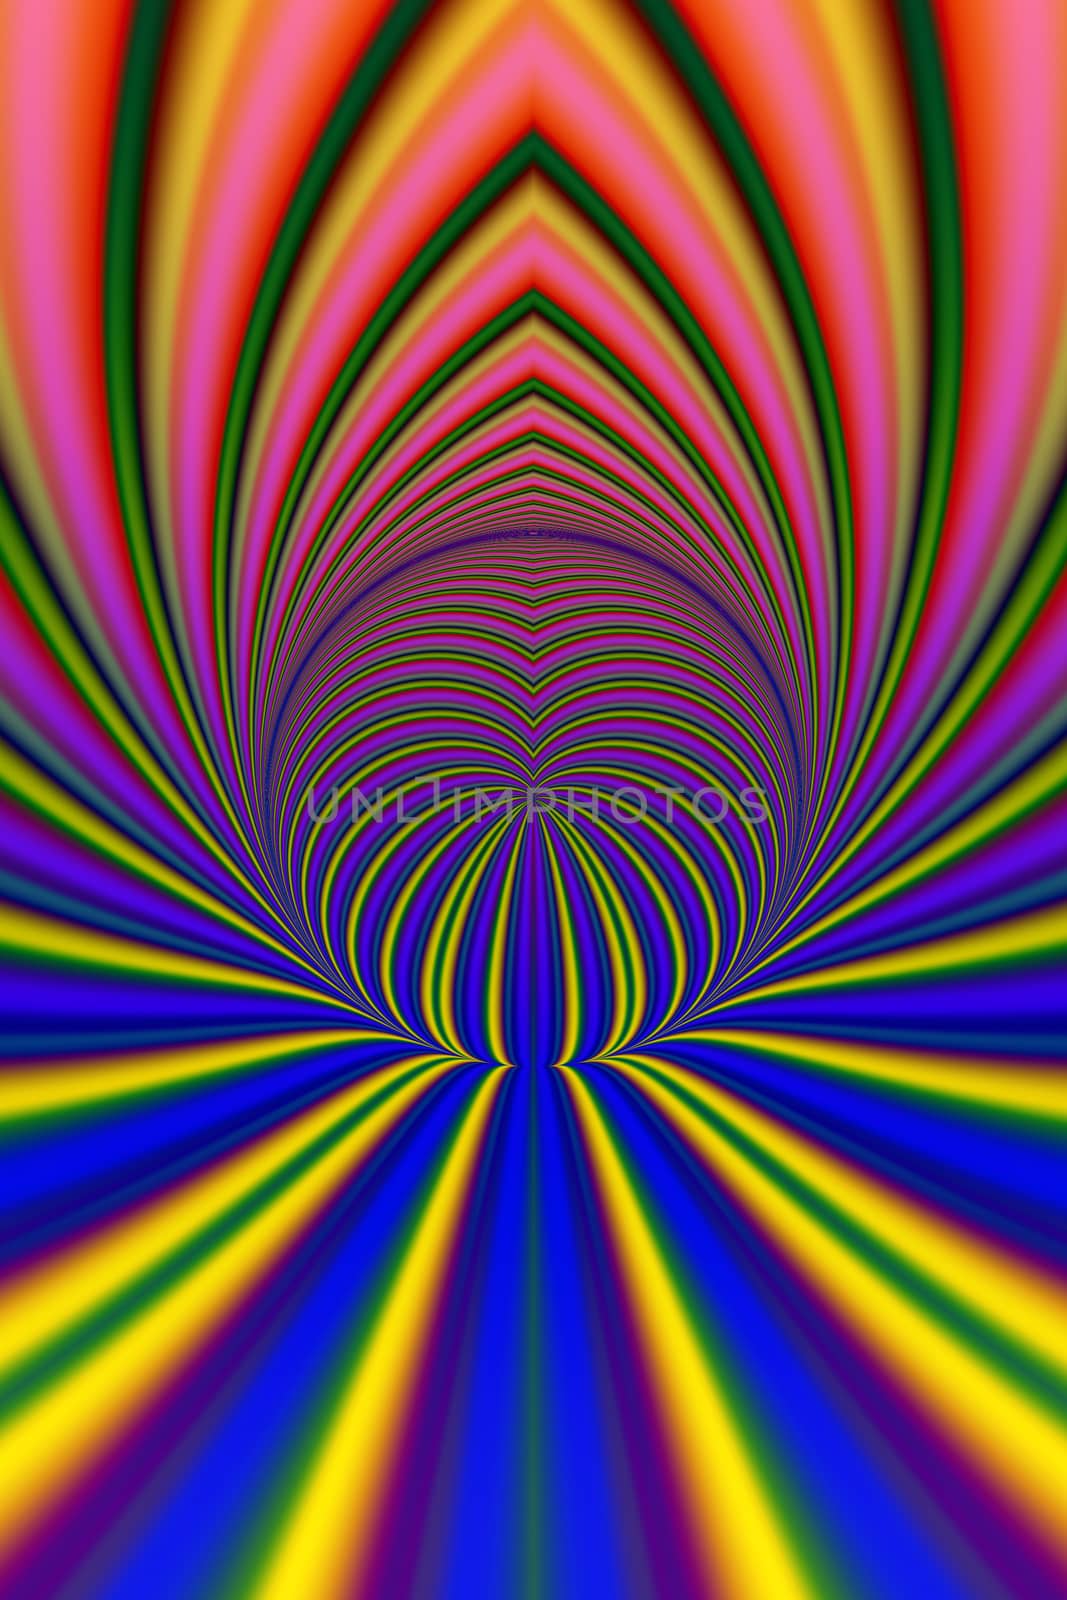 Computer generated abstract colorful fractal artwork for creative design, art, home decoration, entertainment, and mobile and PC screen wallpaper